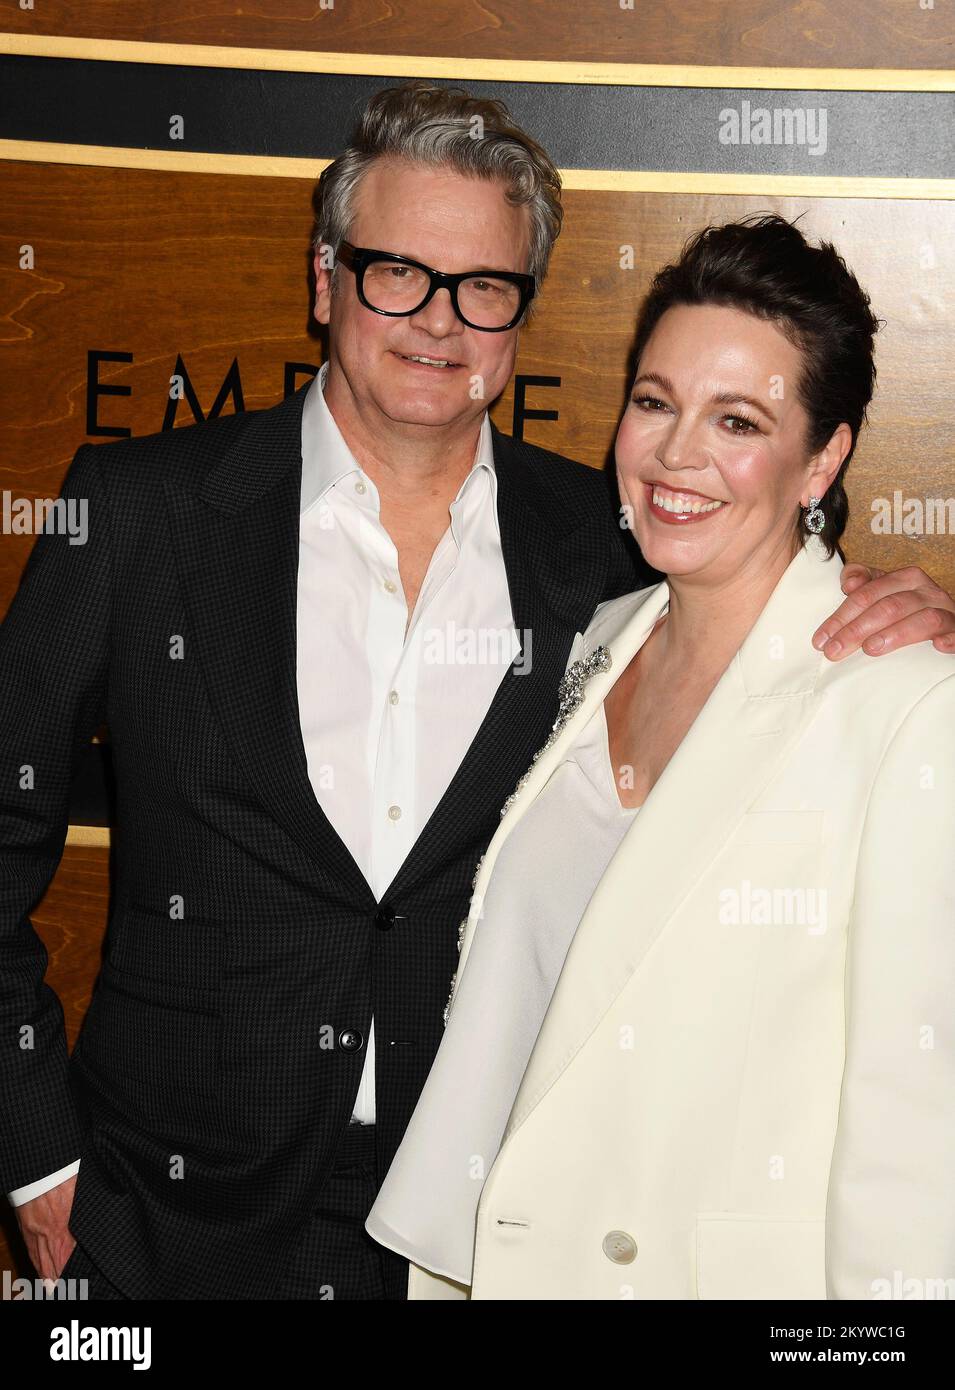 BEVERLY HILLS, CALIFORNIA - DECEMBER 01: (L-R) Colin Firth and Olivia Colman attend Los Angeles premiere of Fox Searchlight Pictures 'Empire of Light' Stock Photo